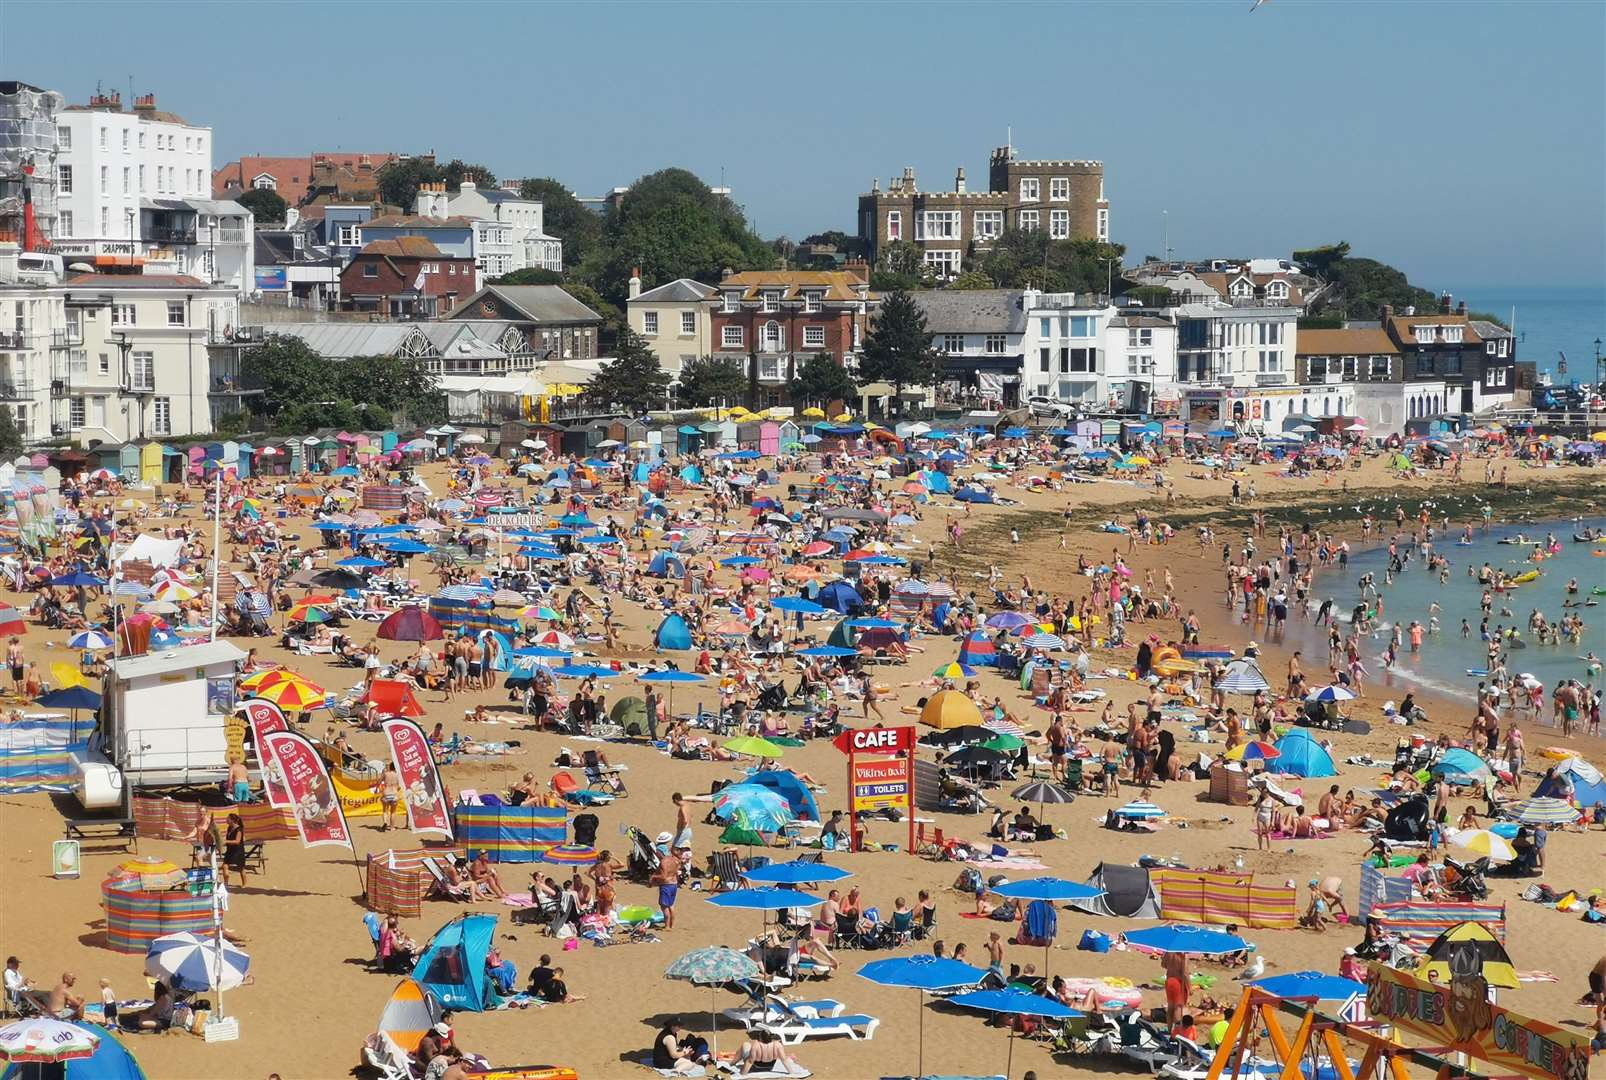 A working group was set up to look at the impacts of tourism on Thanet